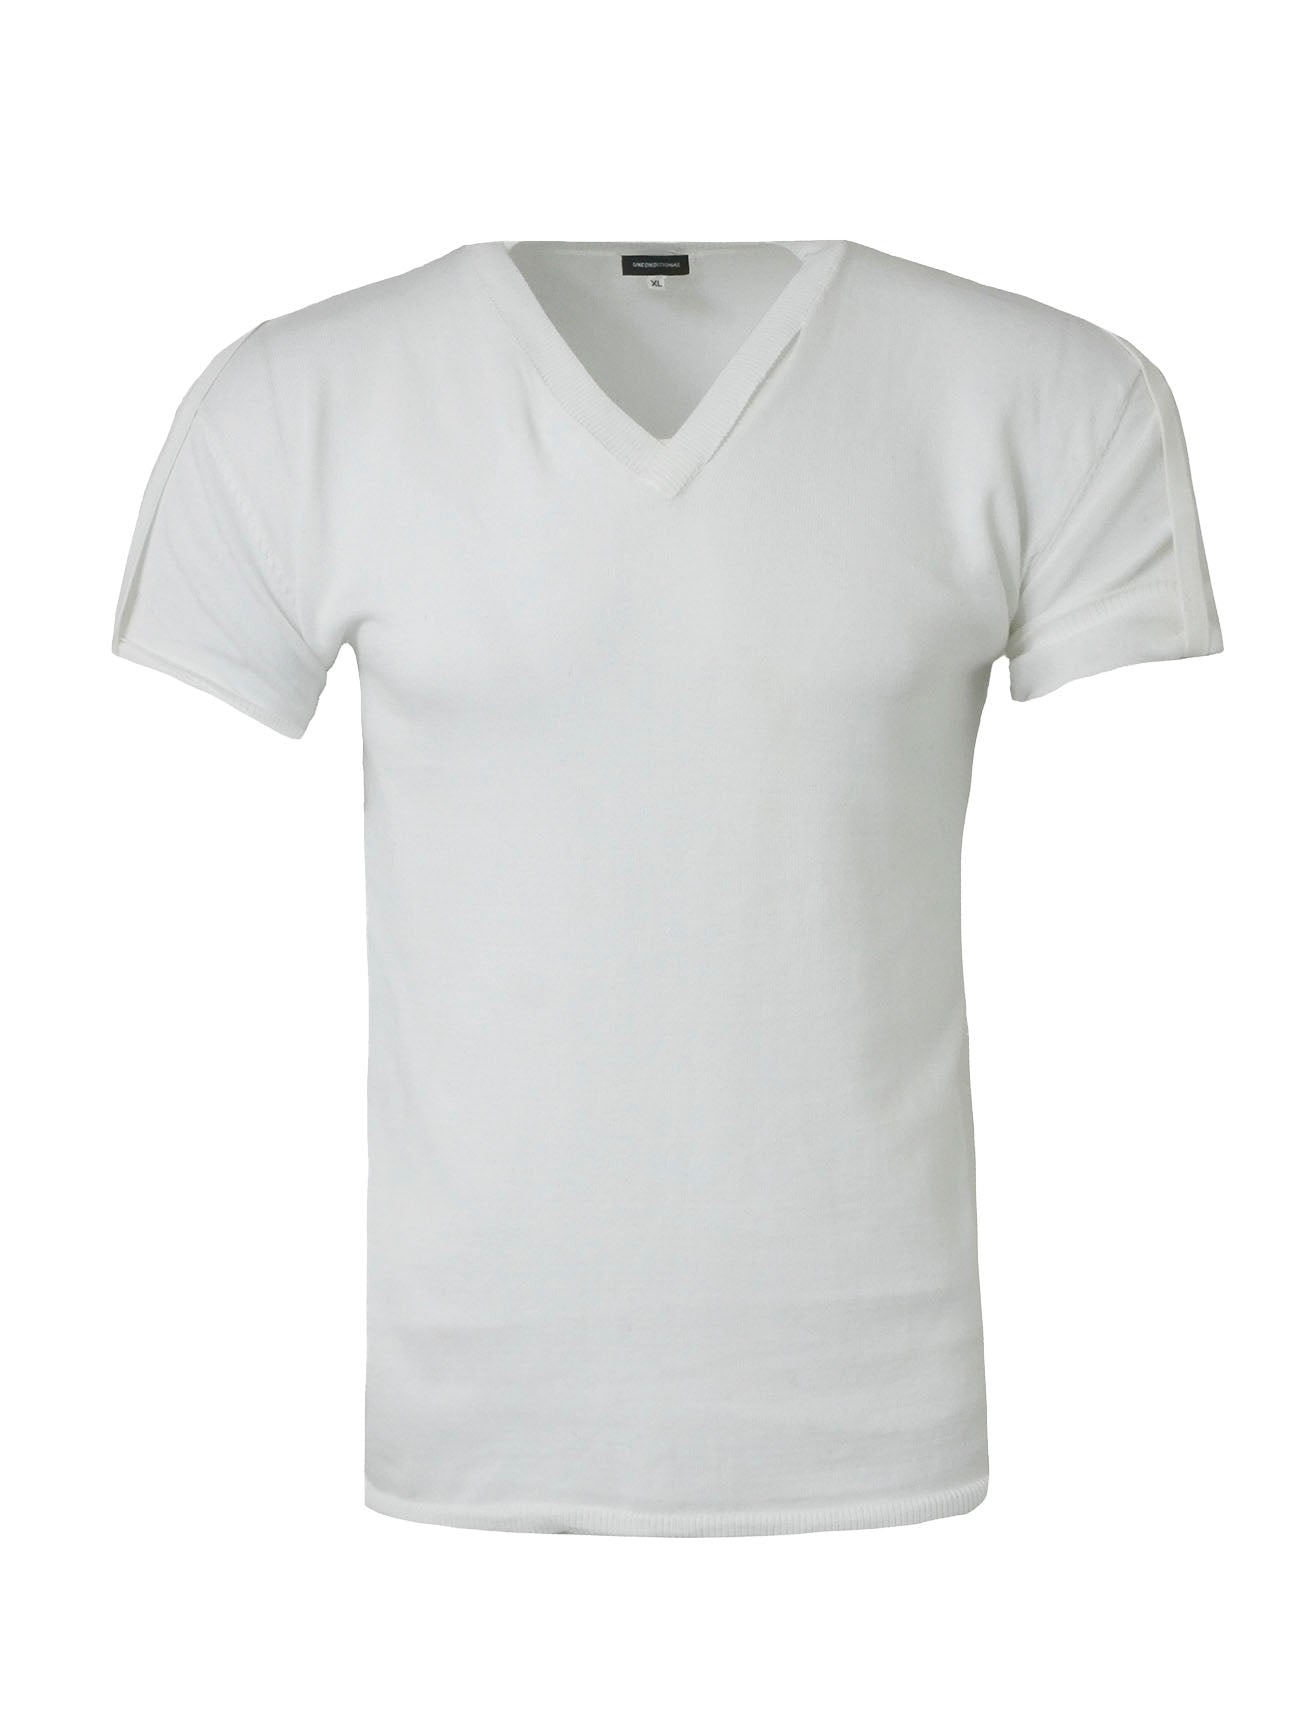 White V-Neck t-Shirt With Button Up Sleeves